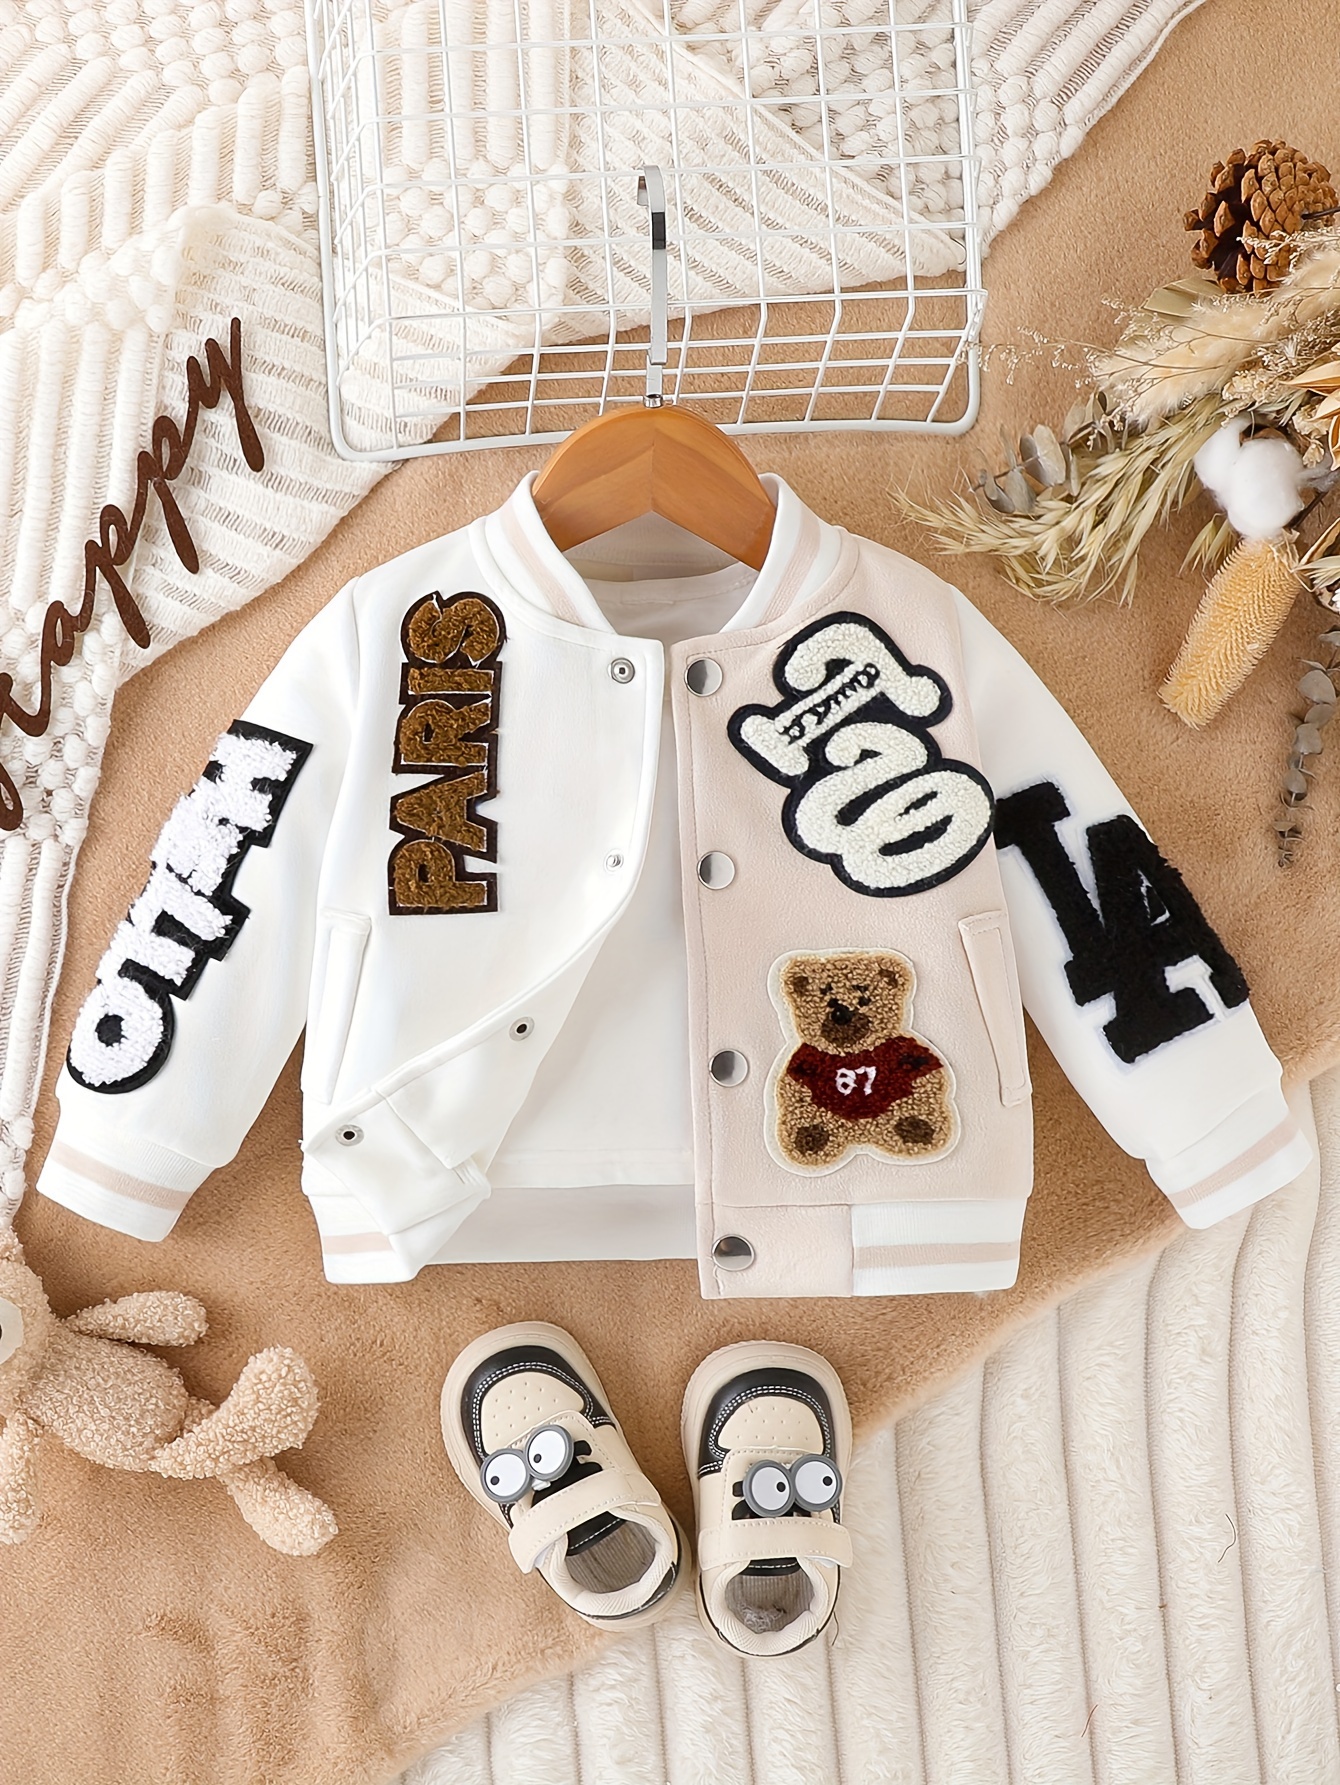 Toddler Girl 100% Cotton Letter Embroidered Textured Striped Button Design Bomber Jacket